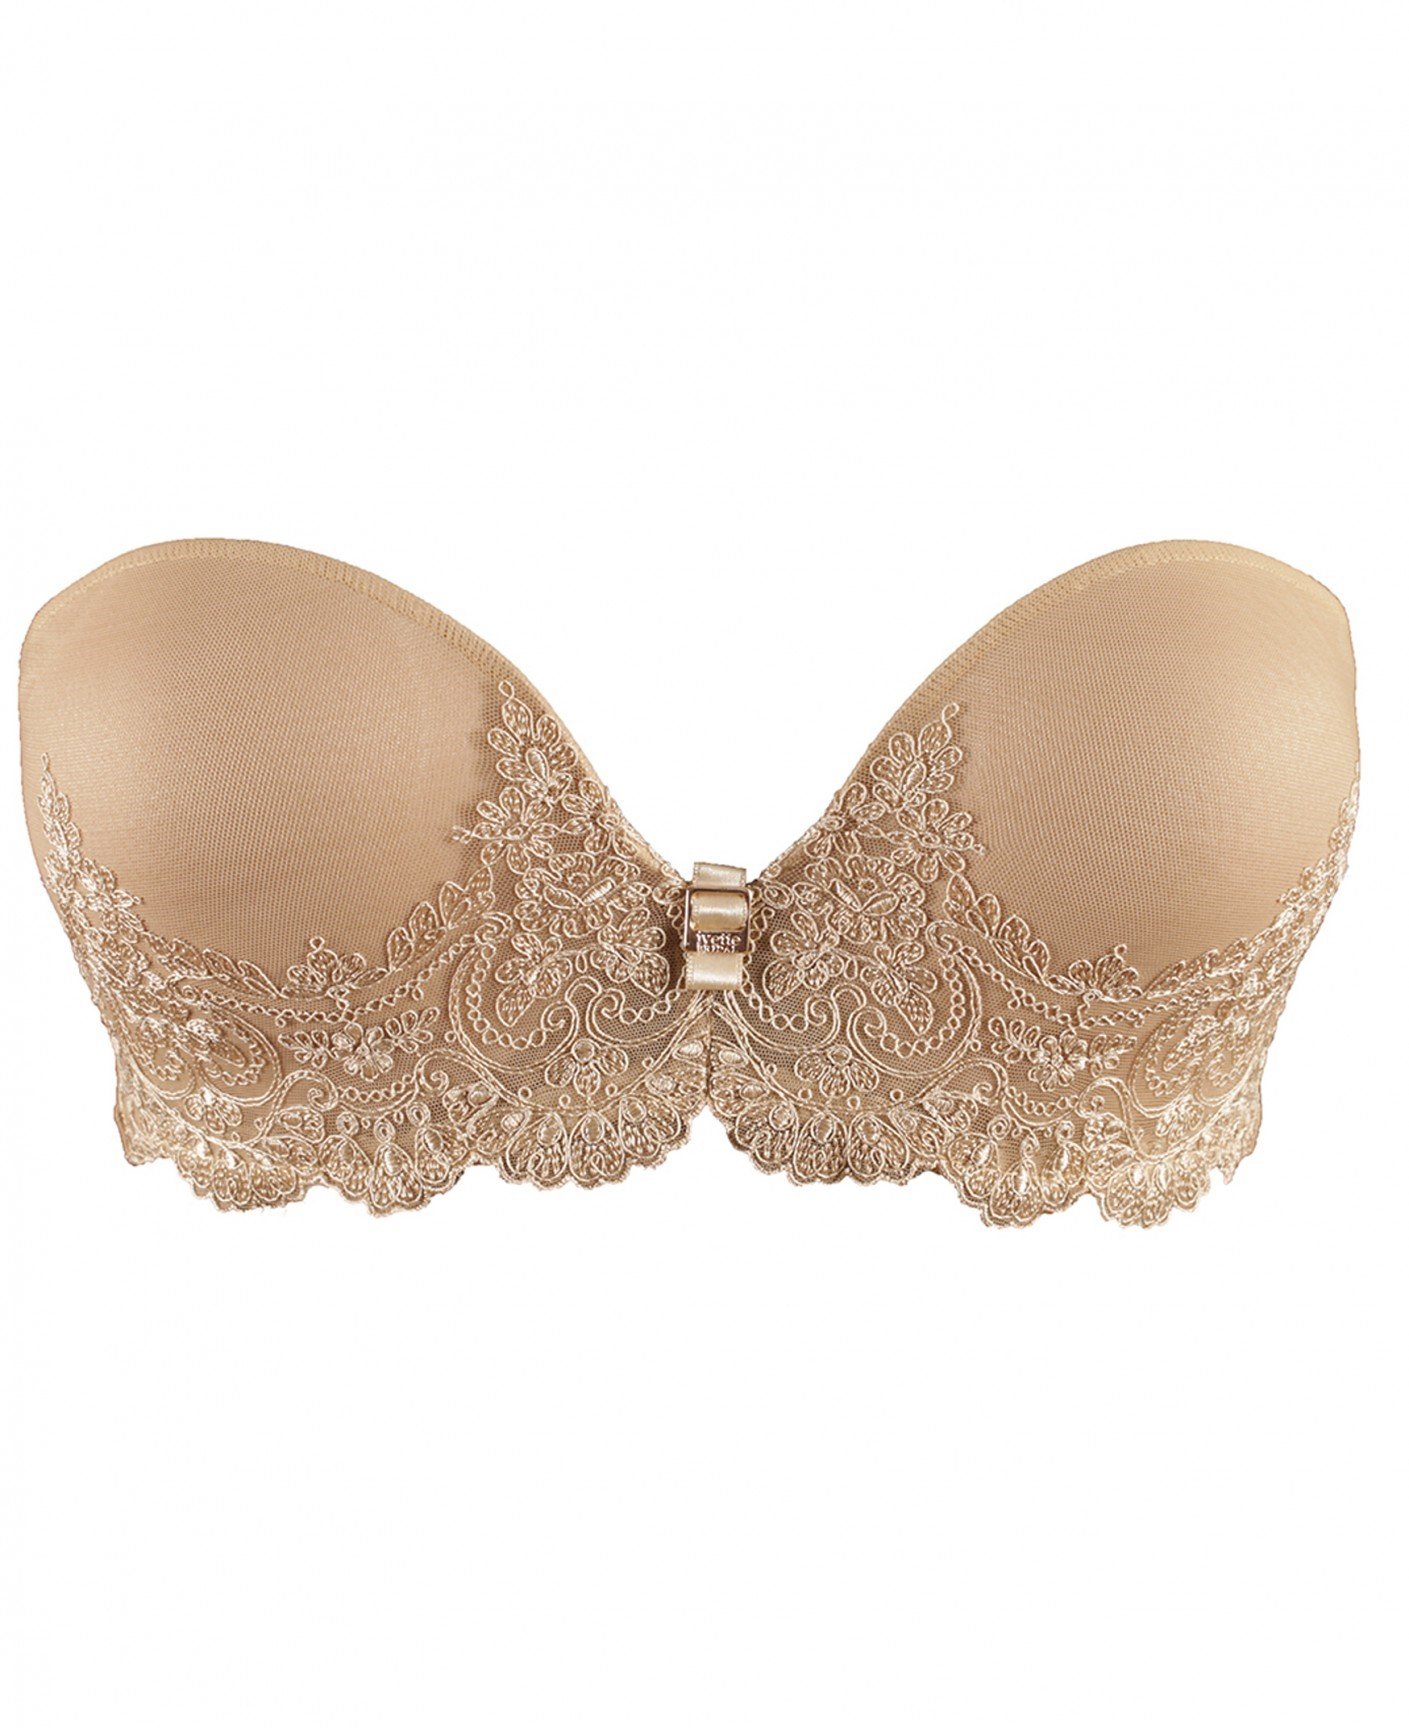 Heritage Nude Strapless Low-Cut Neckline Bra with Double Push Up